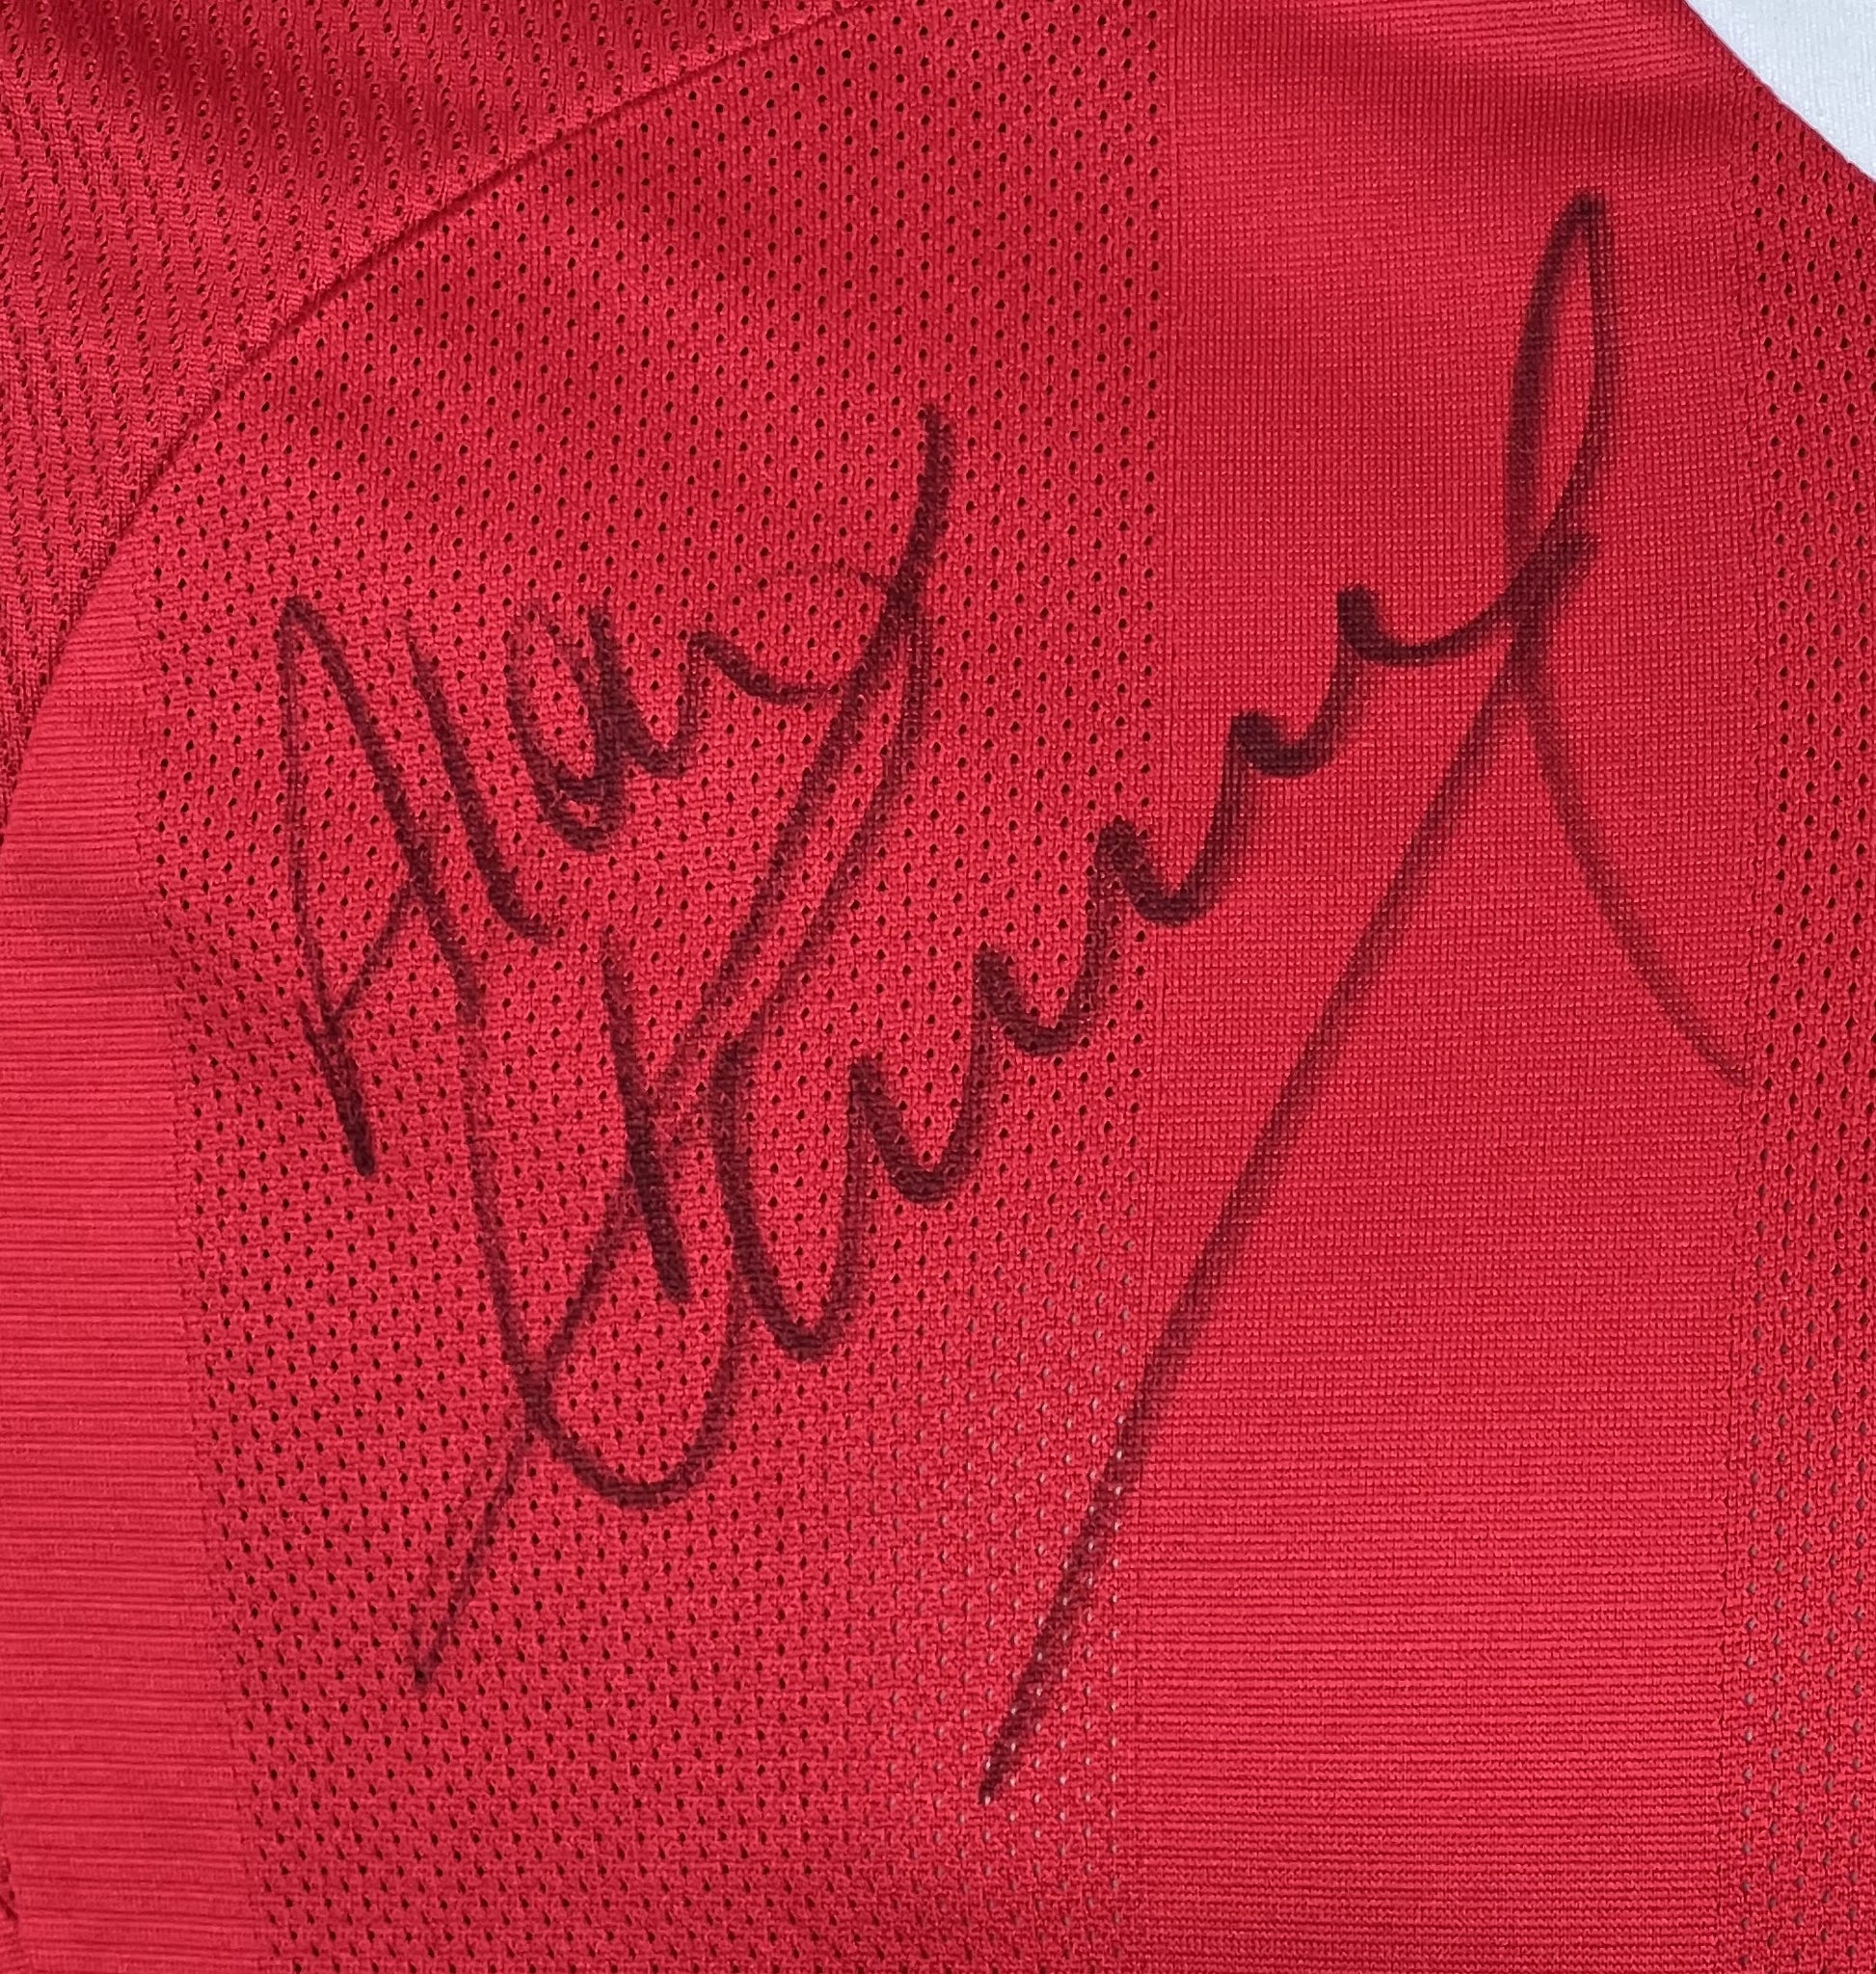 Close-up of Alan Kennedy’s autograph on Liverpool 2008 Home Shirt - AMAA Authenticated